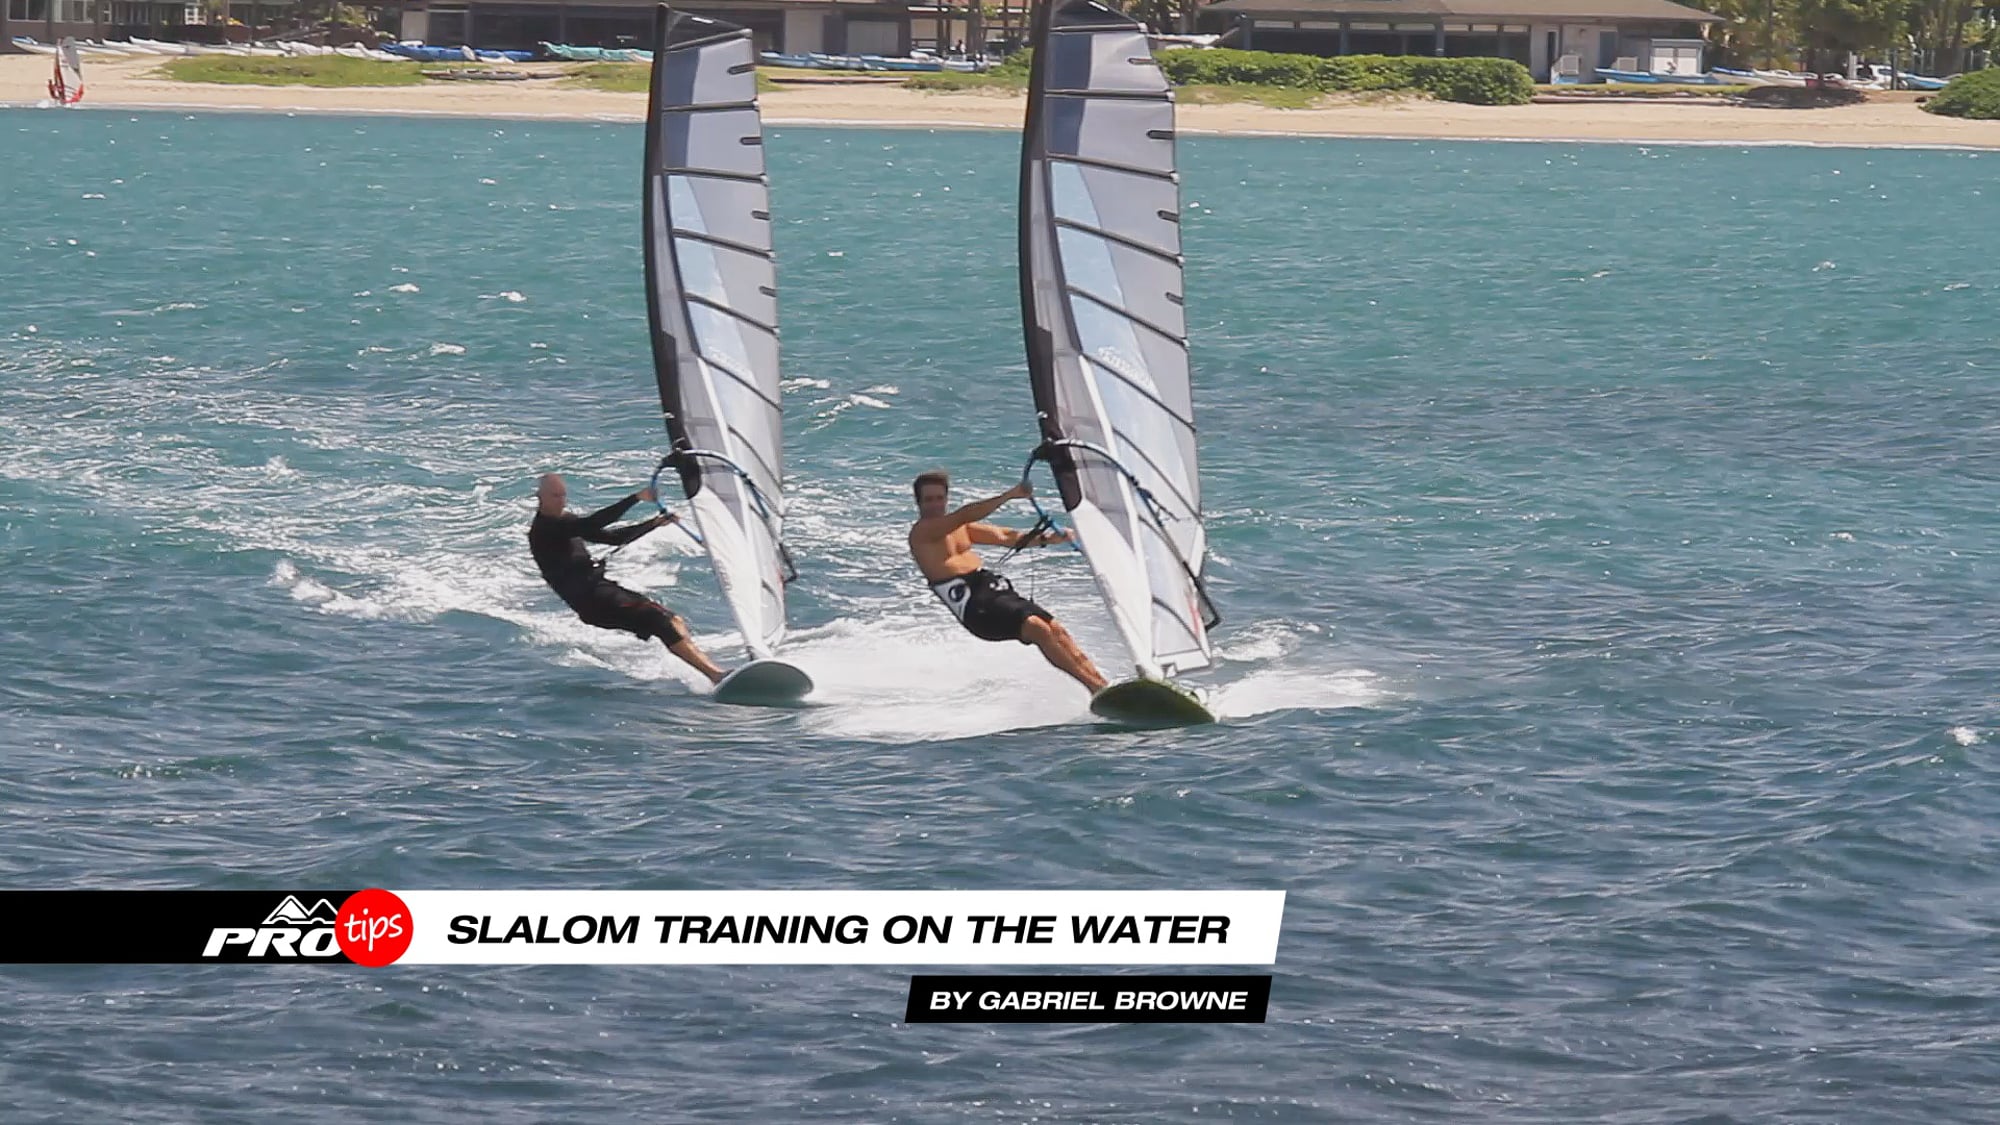 Pro Tips On the water Slalom Training Windsurfing Videos MauiSails Hawaii